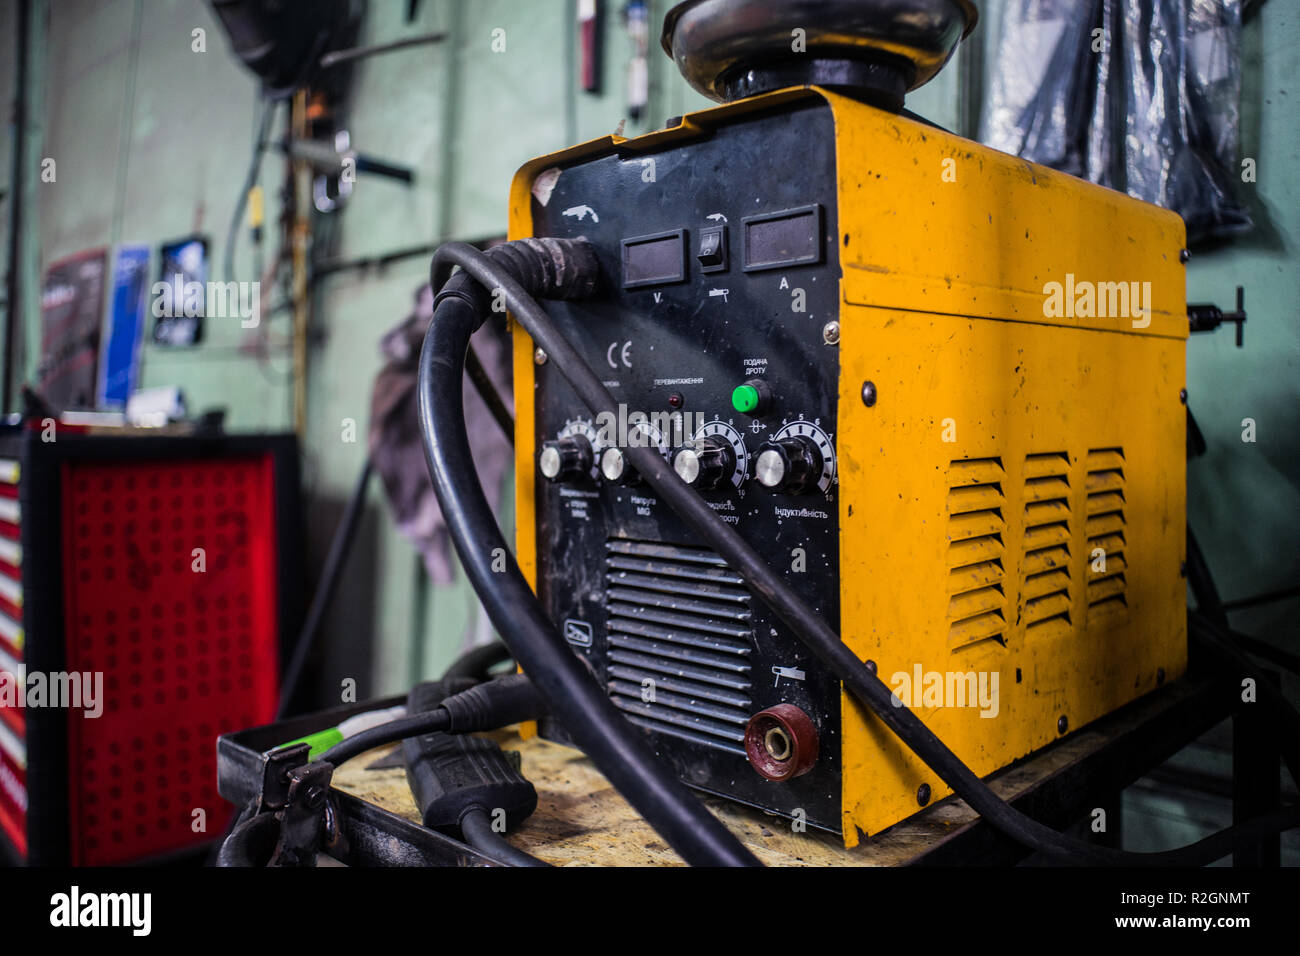 Welding MIG machine in yellow color, used in workshop Stock Photo